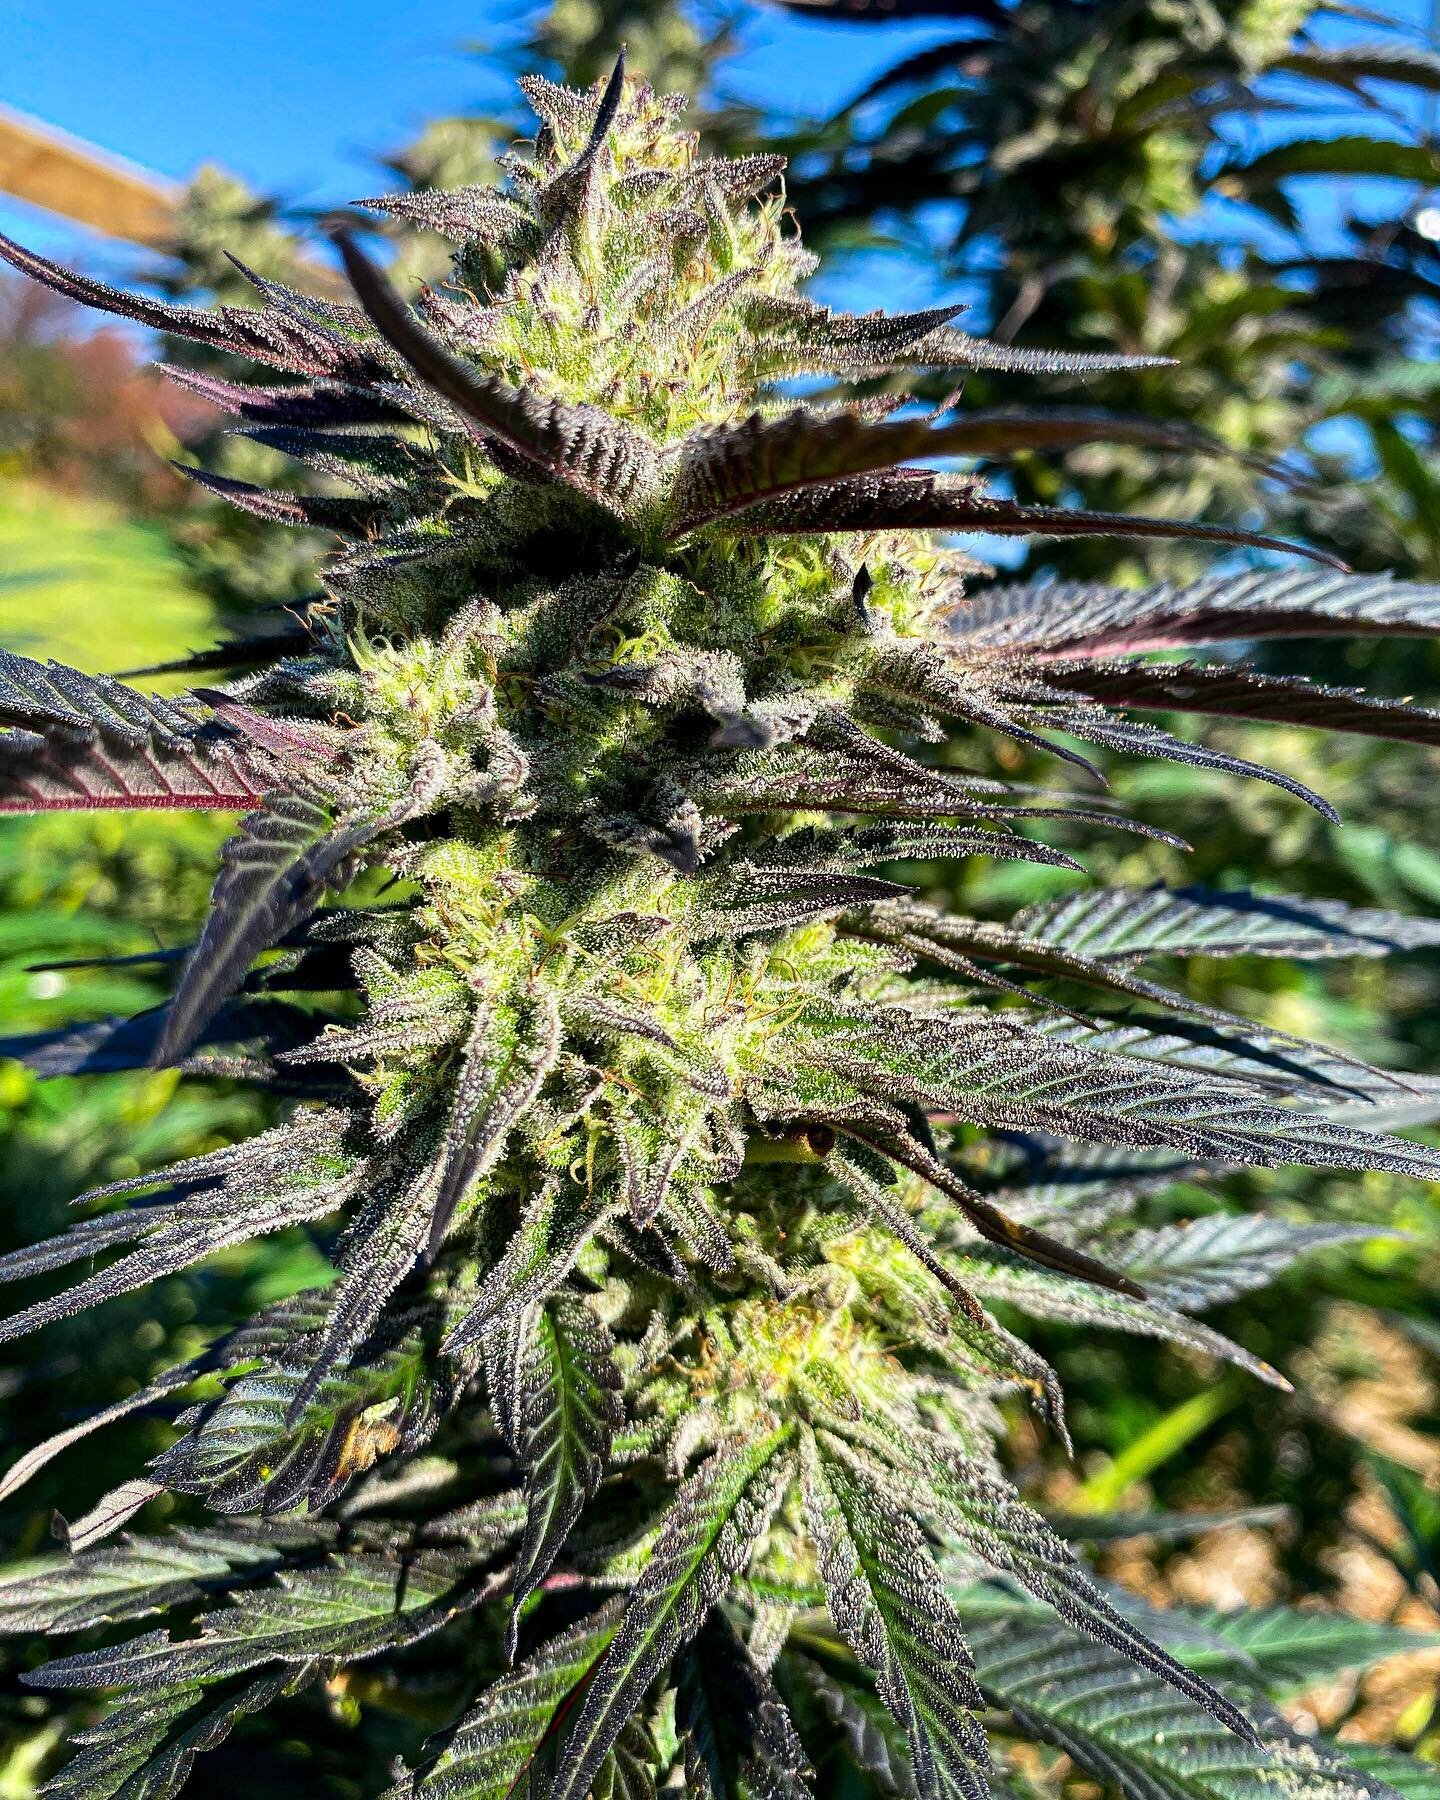 Cosmic antennae bringing down the sentience of the stars to uplift your thoughts. 🌱💫

Radio Flyer bred by @biovortex 
#sungrown #outdoor #vermontfarm #biodynamic